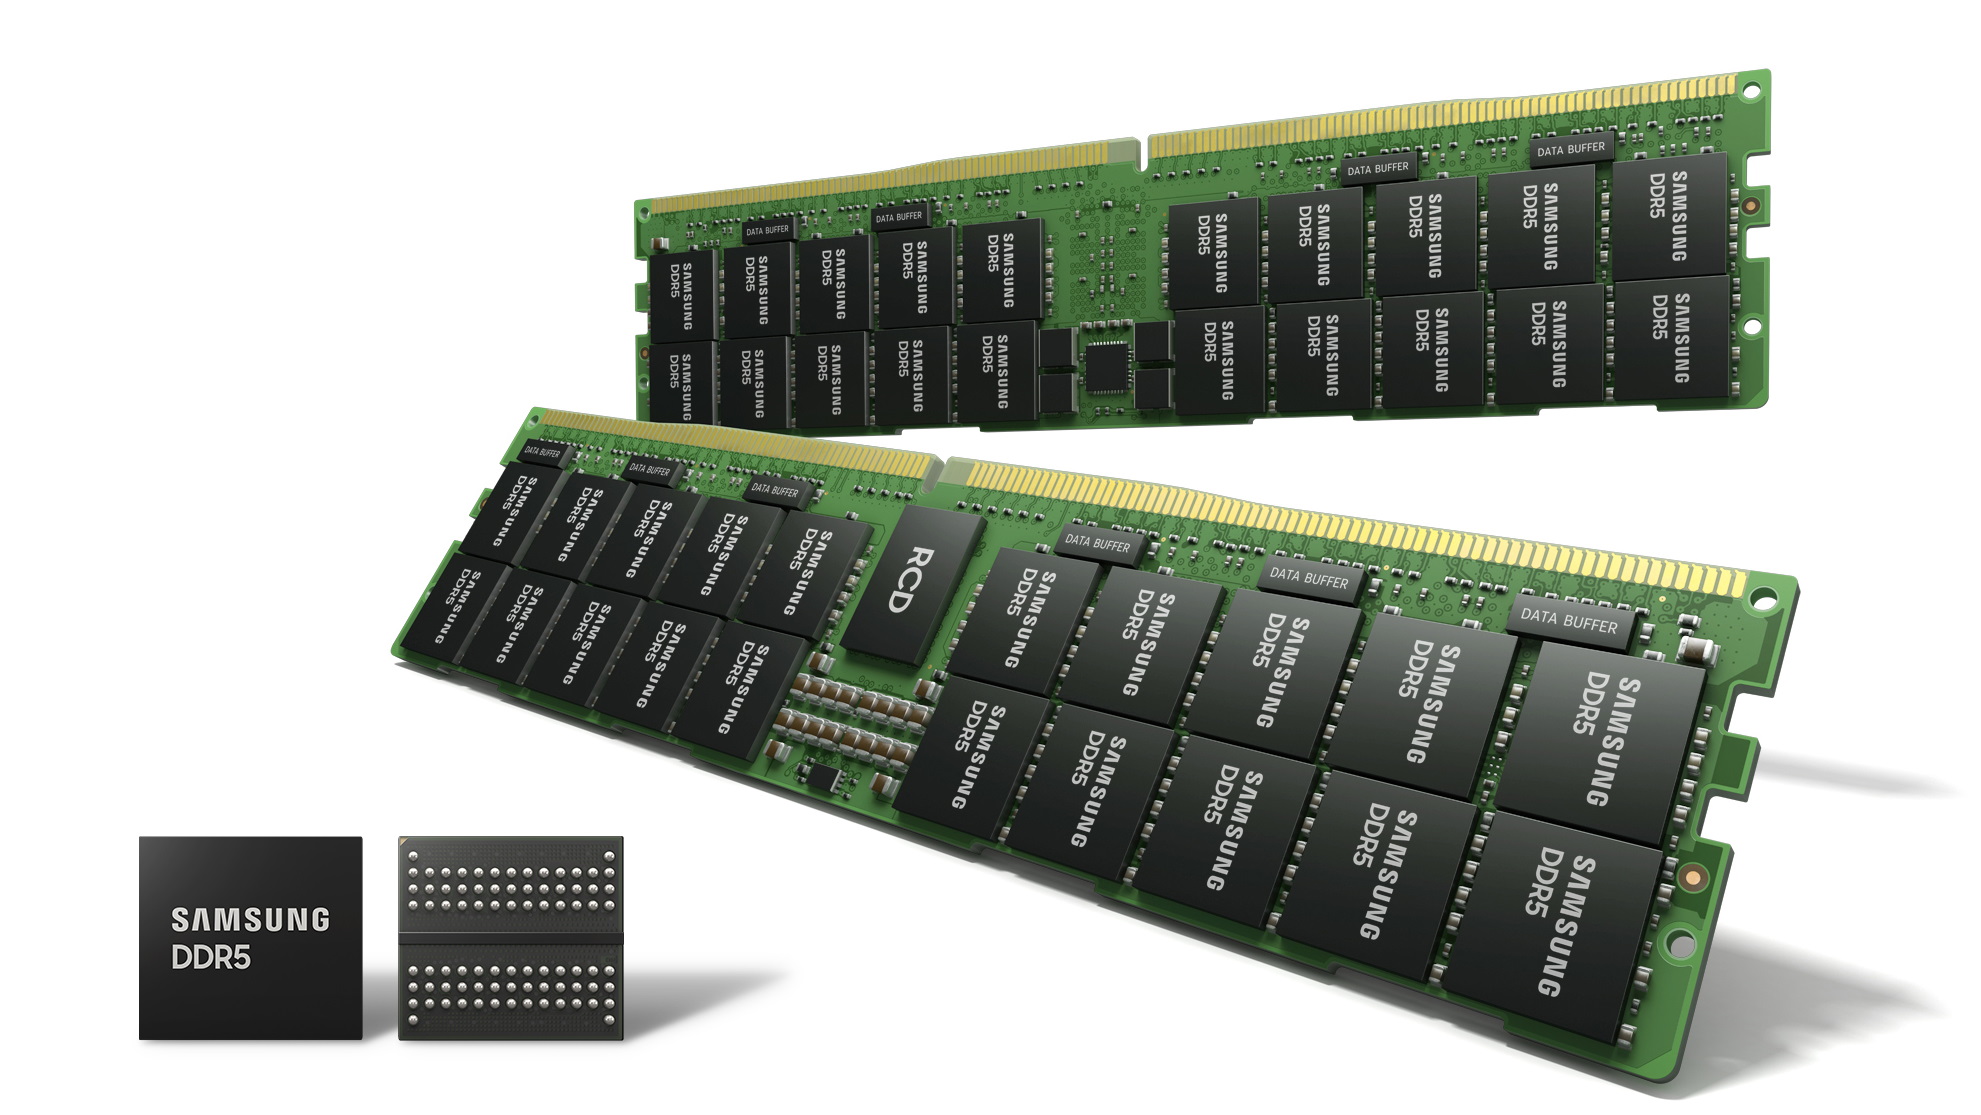 Samsung’s ‘extreme ultraviolet’ RAM is set to be super-fast – but when’s it coming to PCs?